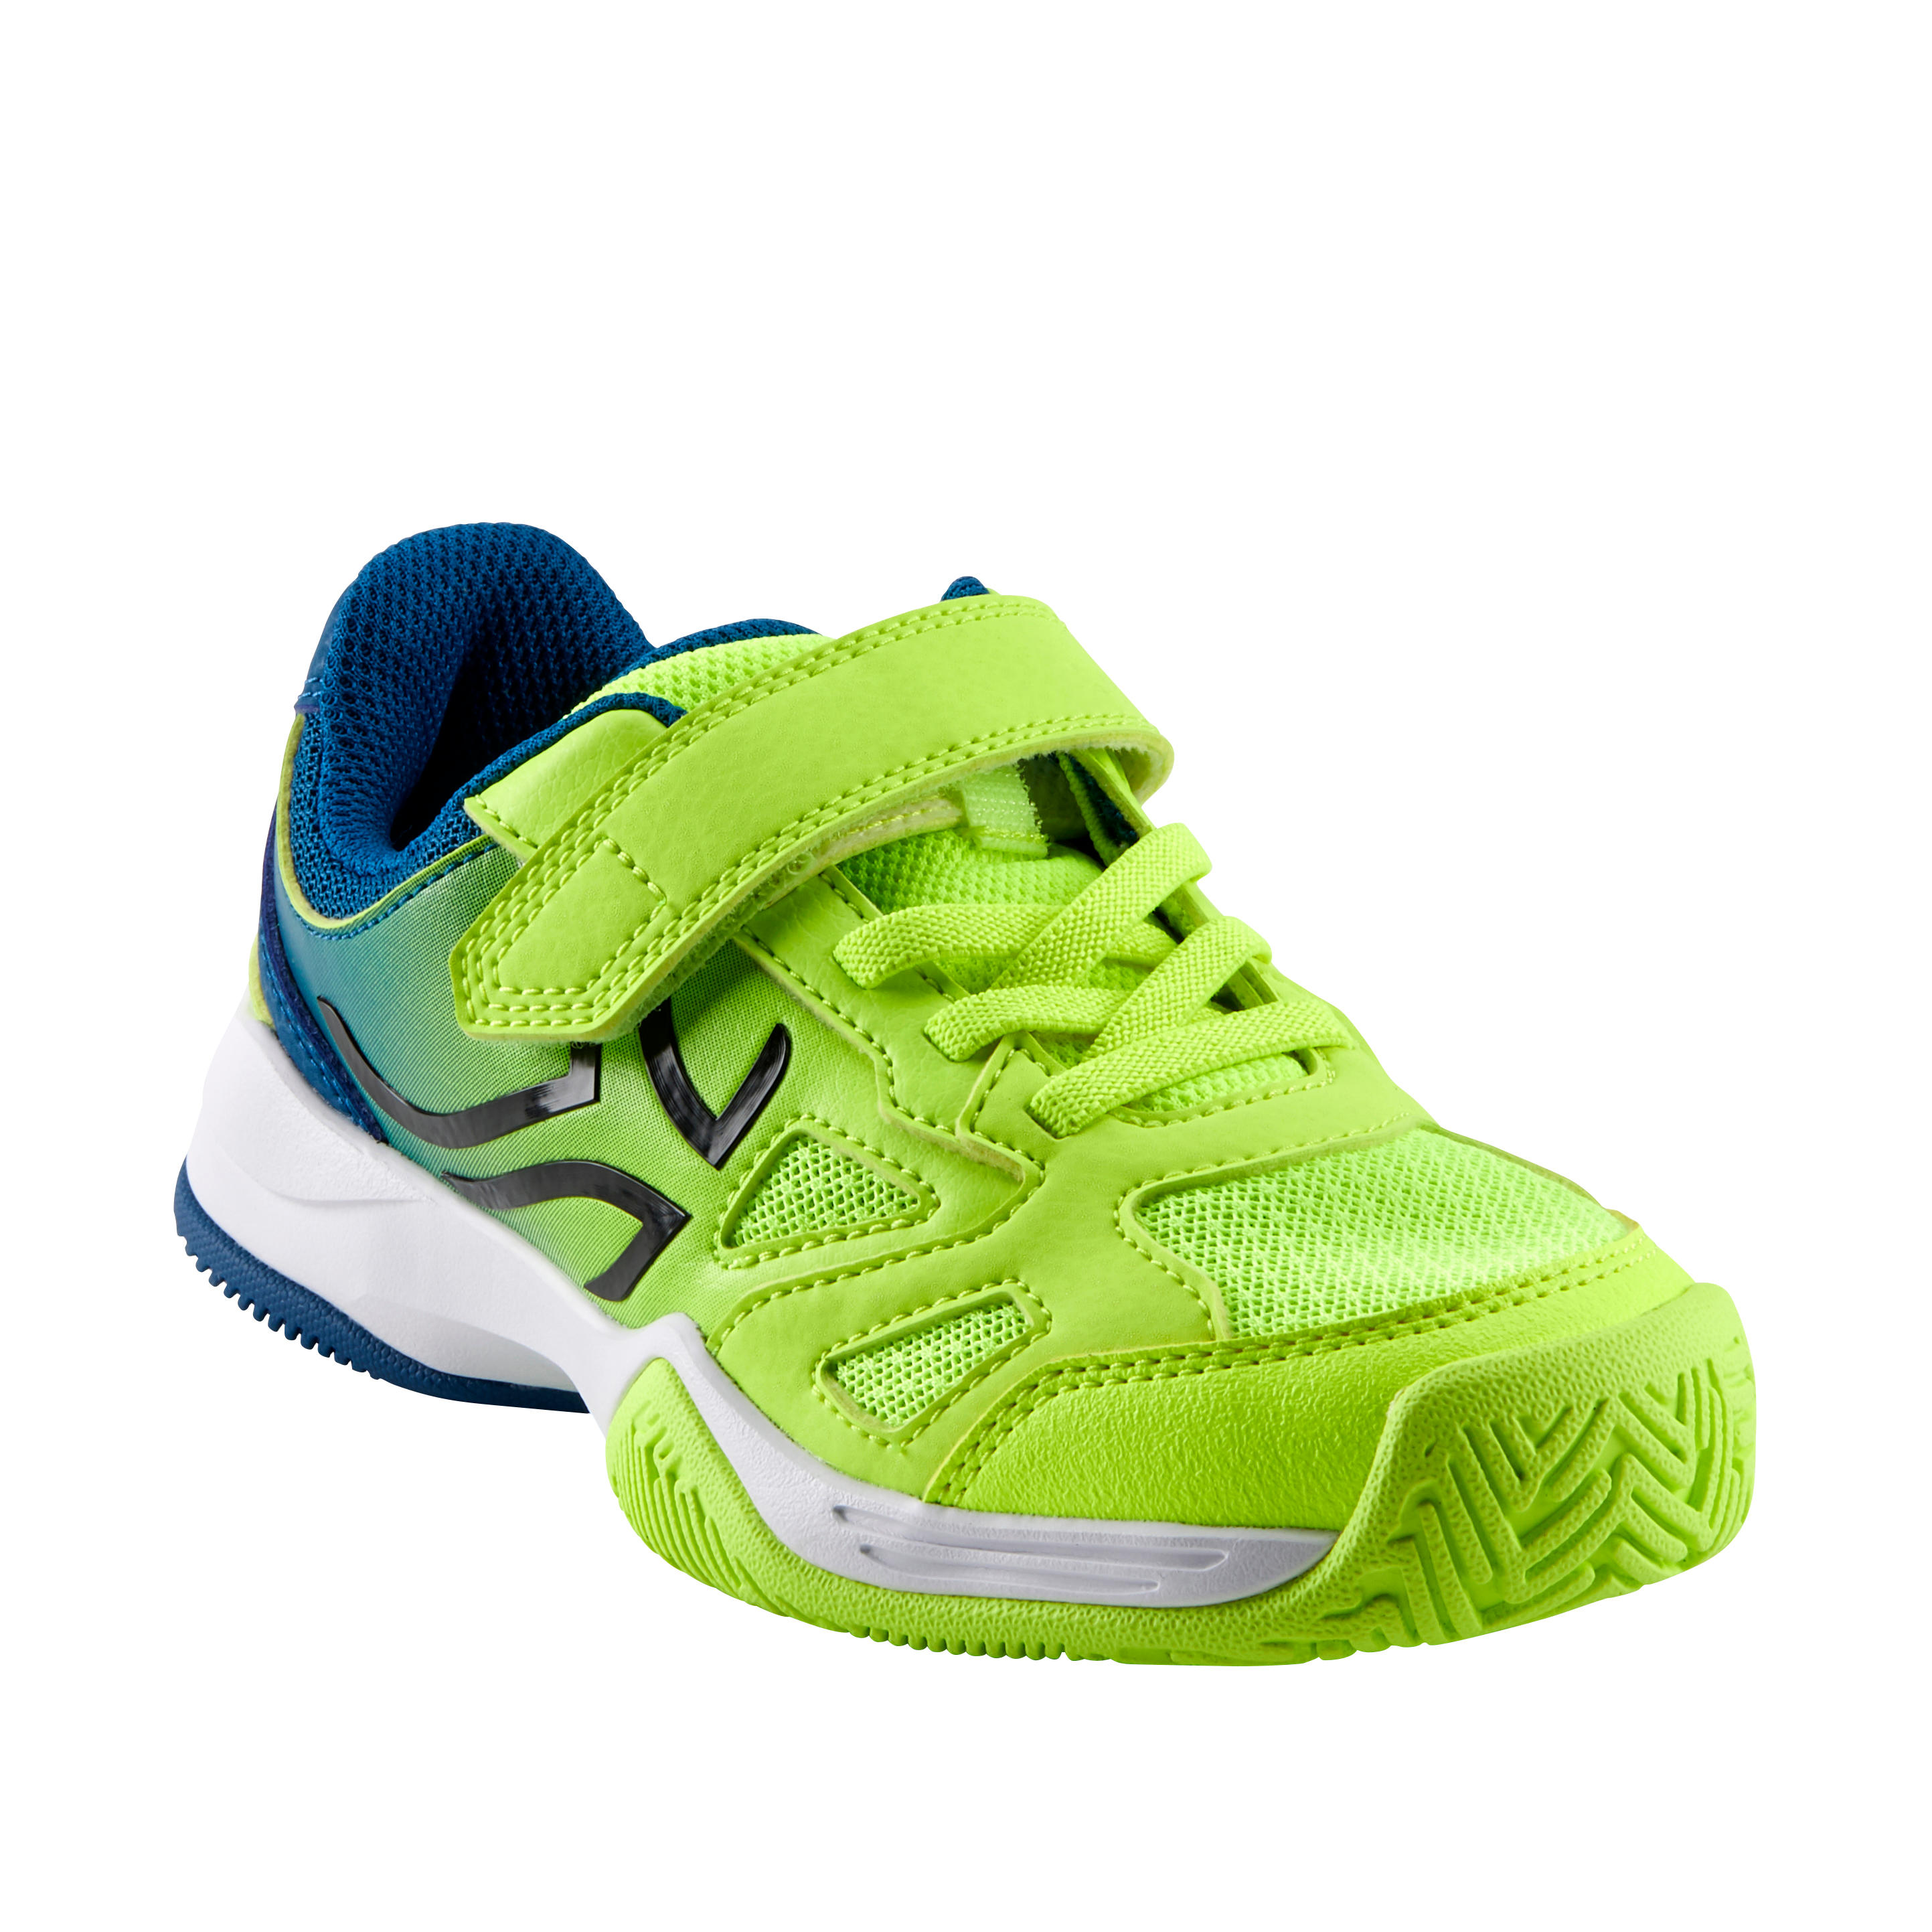 fluo lime yellow